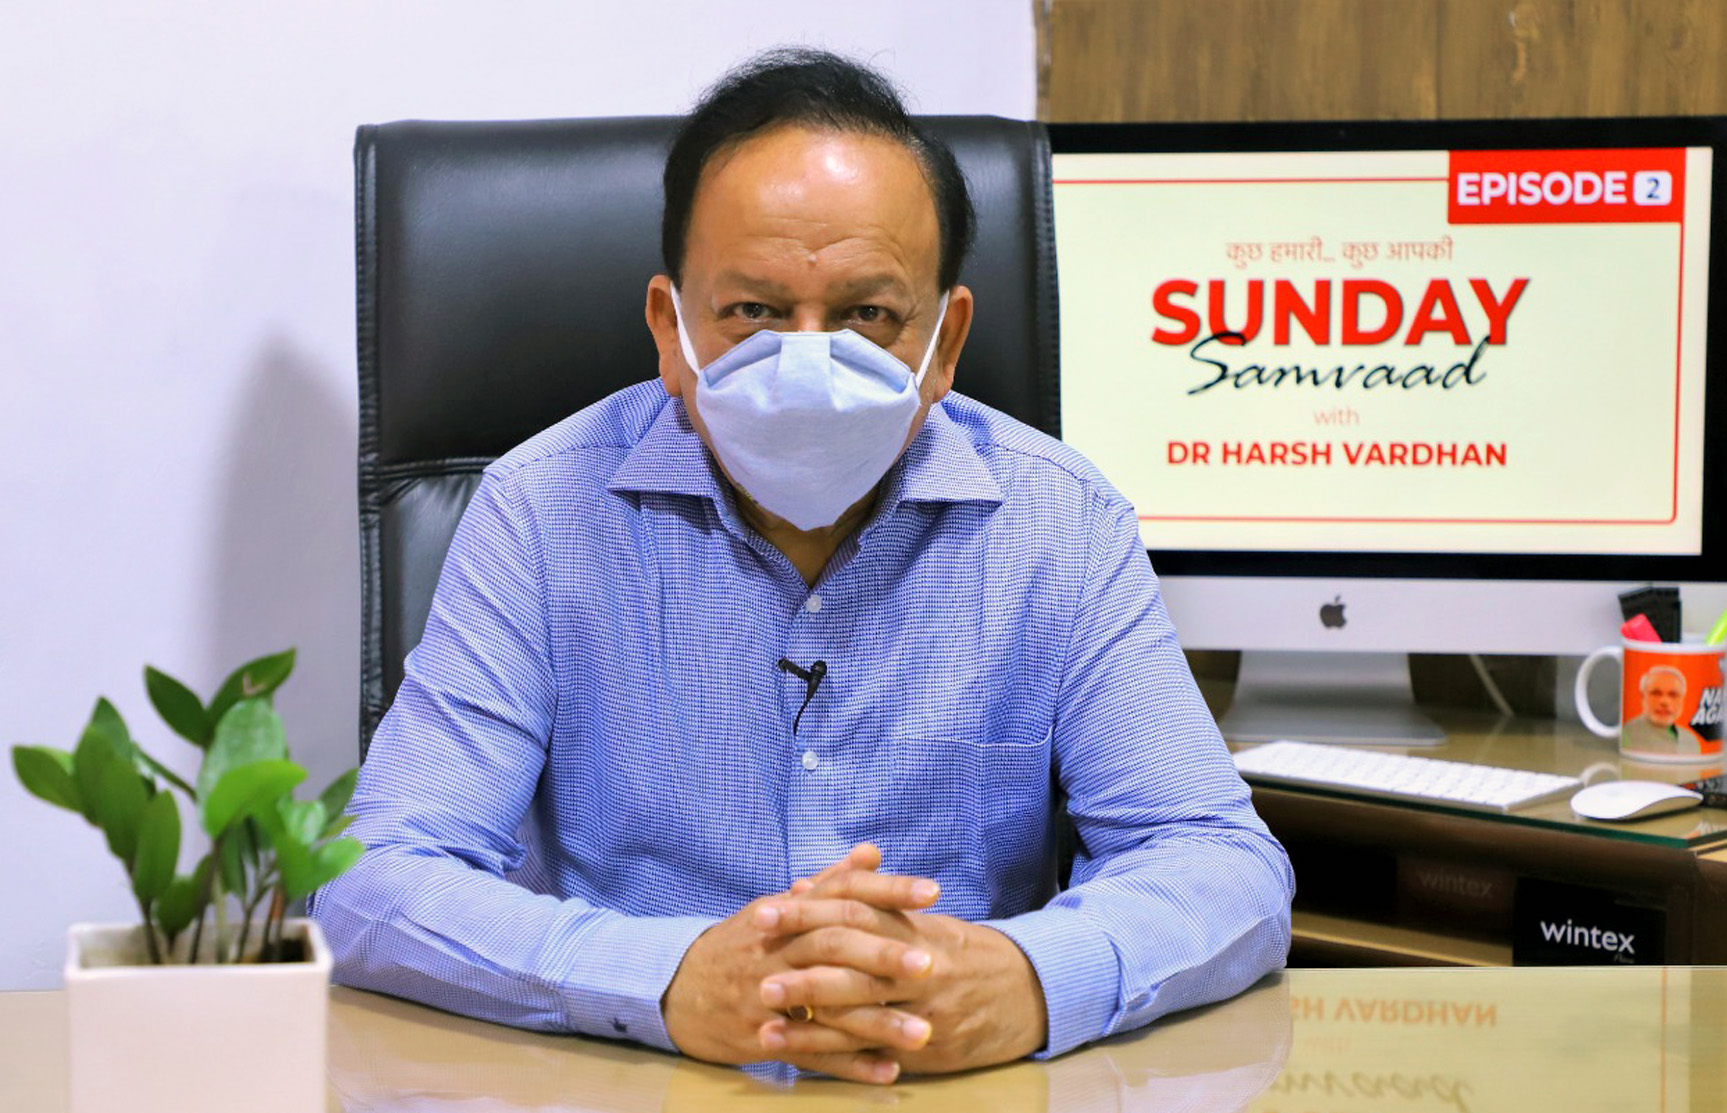 No scope for industry to follow IPR all over pandemic: Harsh Vardhan